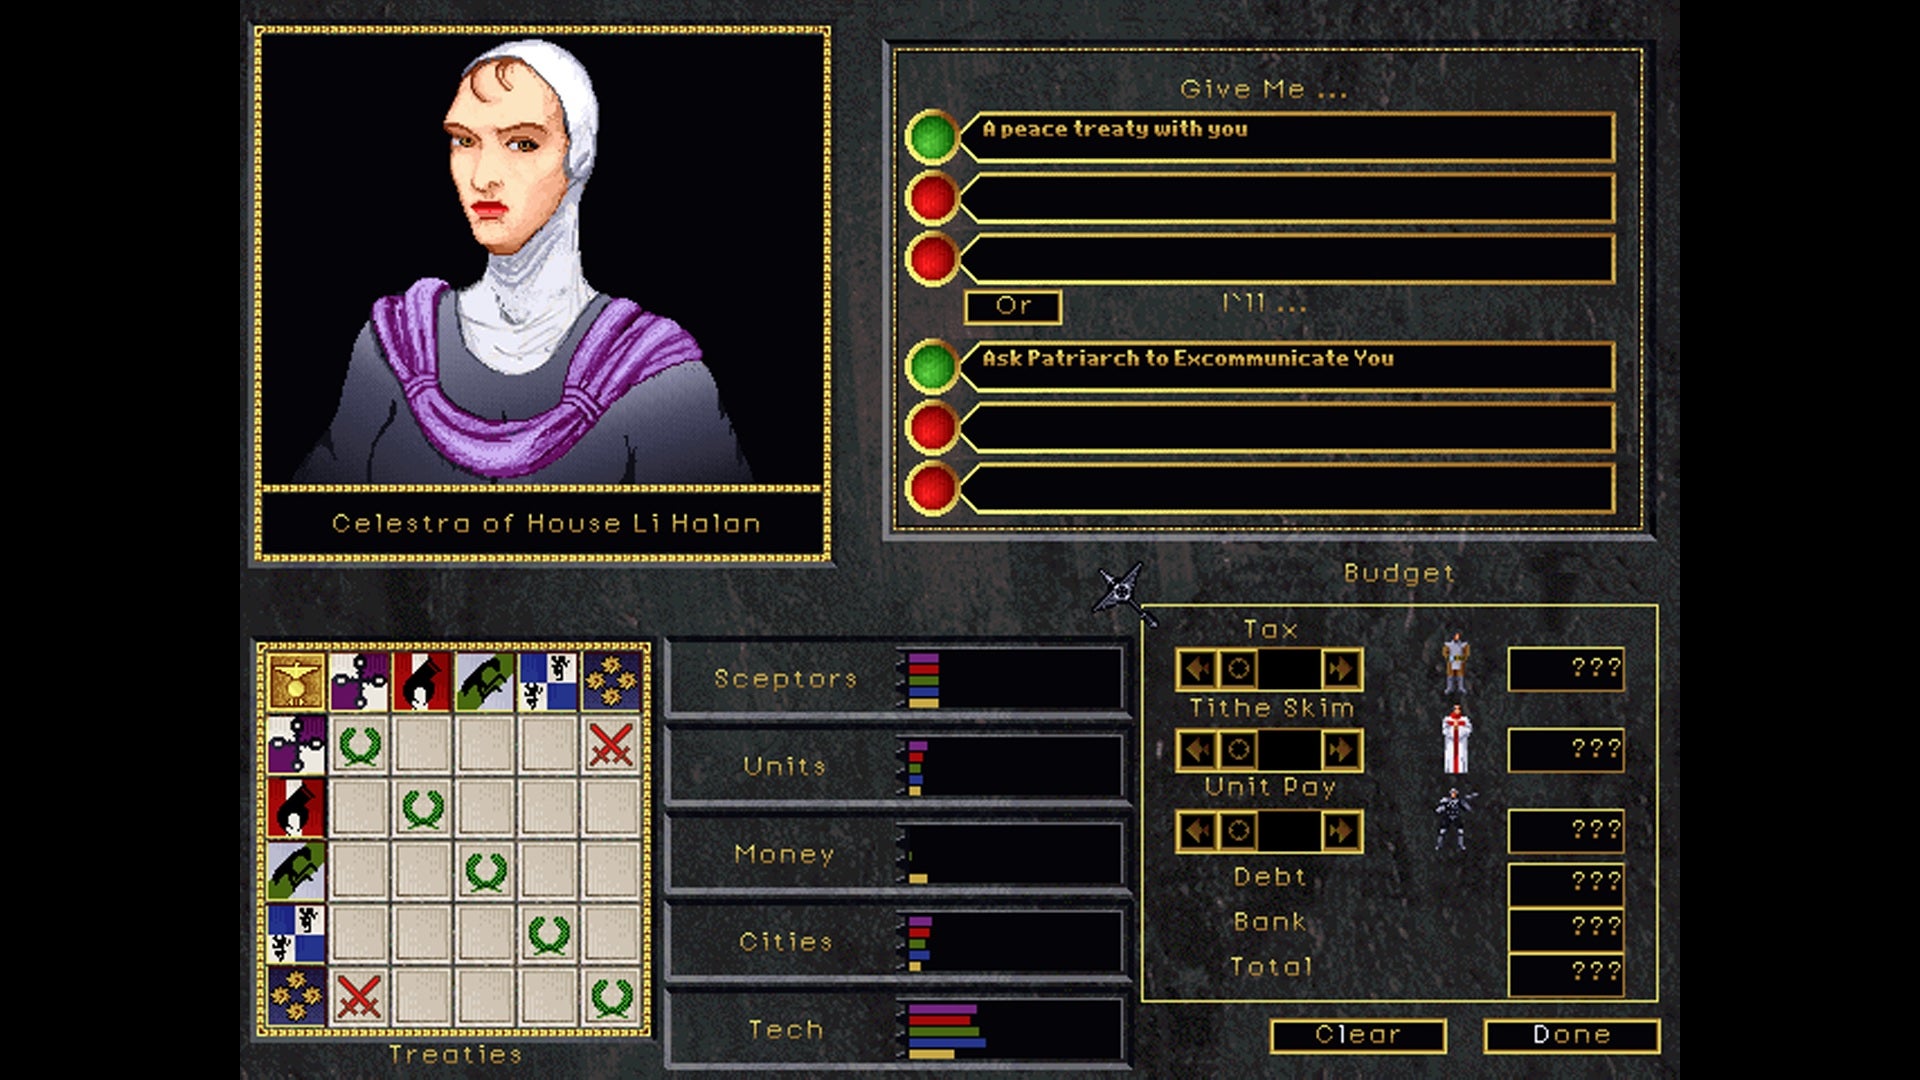 A diplomatic screen showing possible actions to take with Celestra of House Li Halan in Emperor Of The Fading Suns